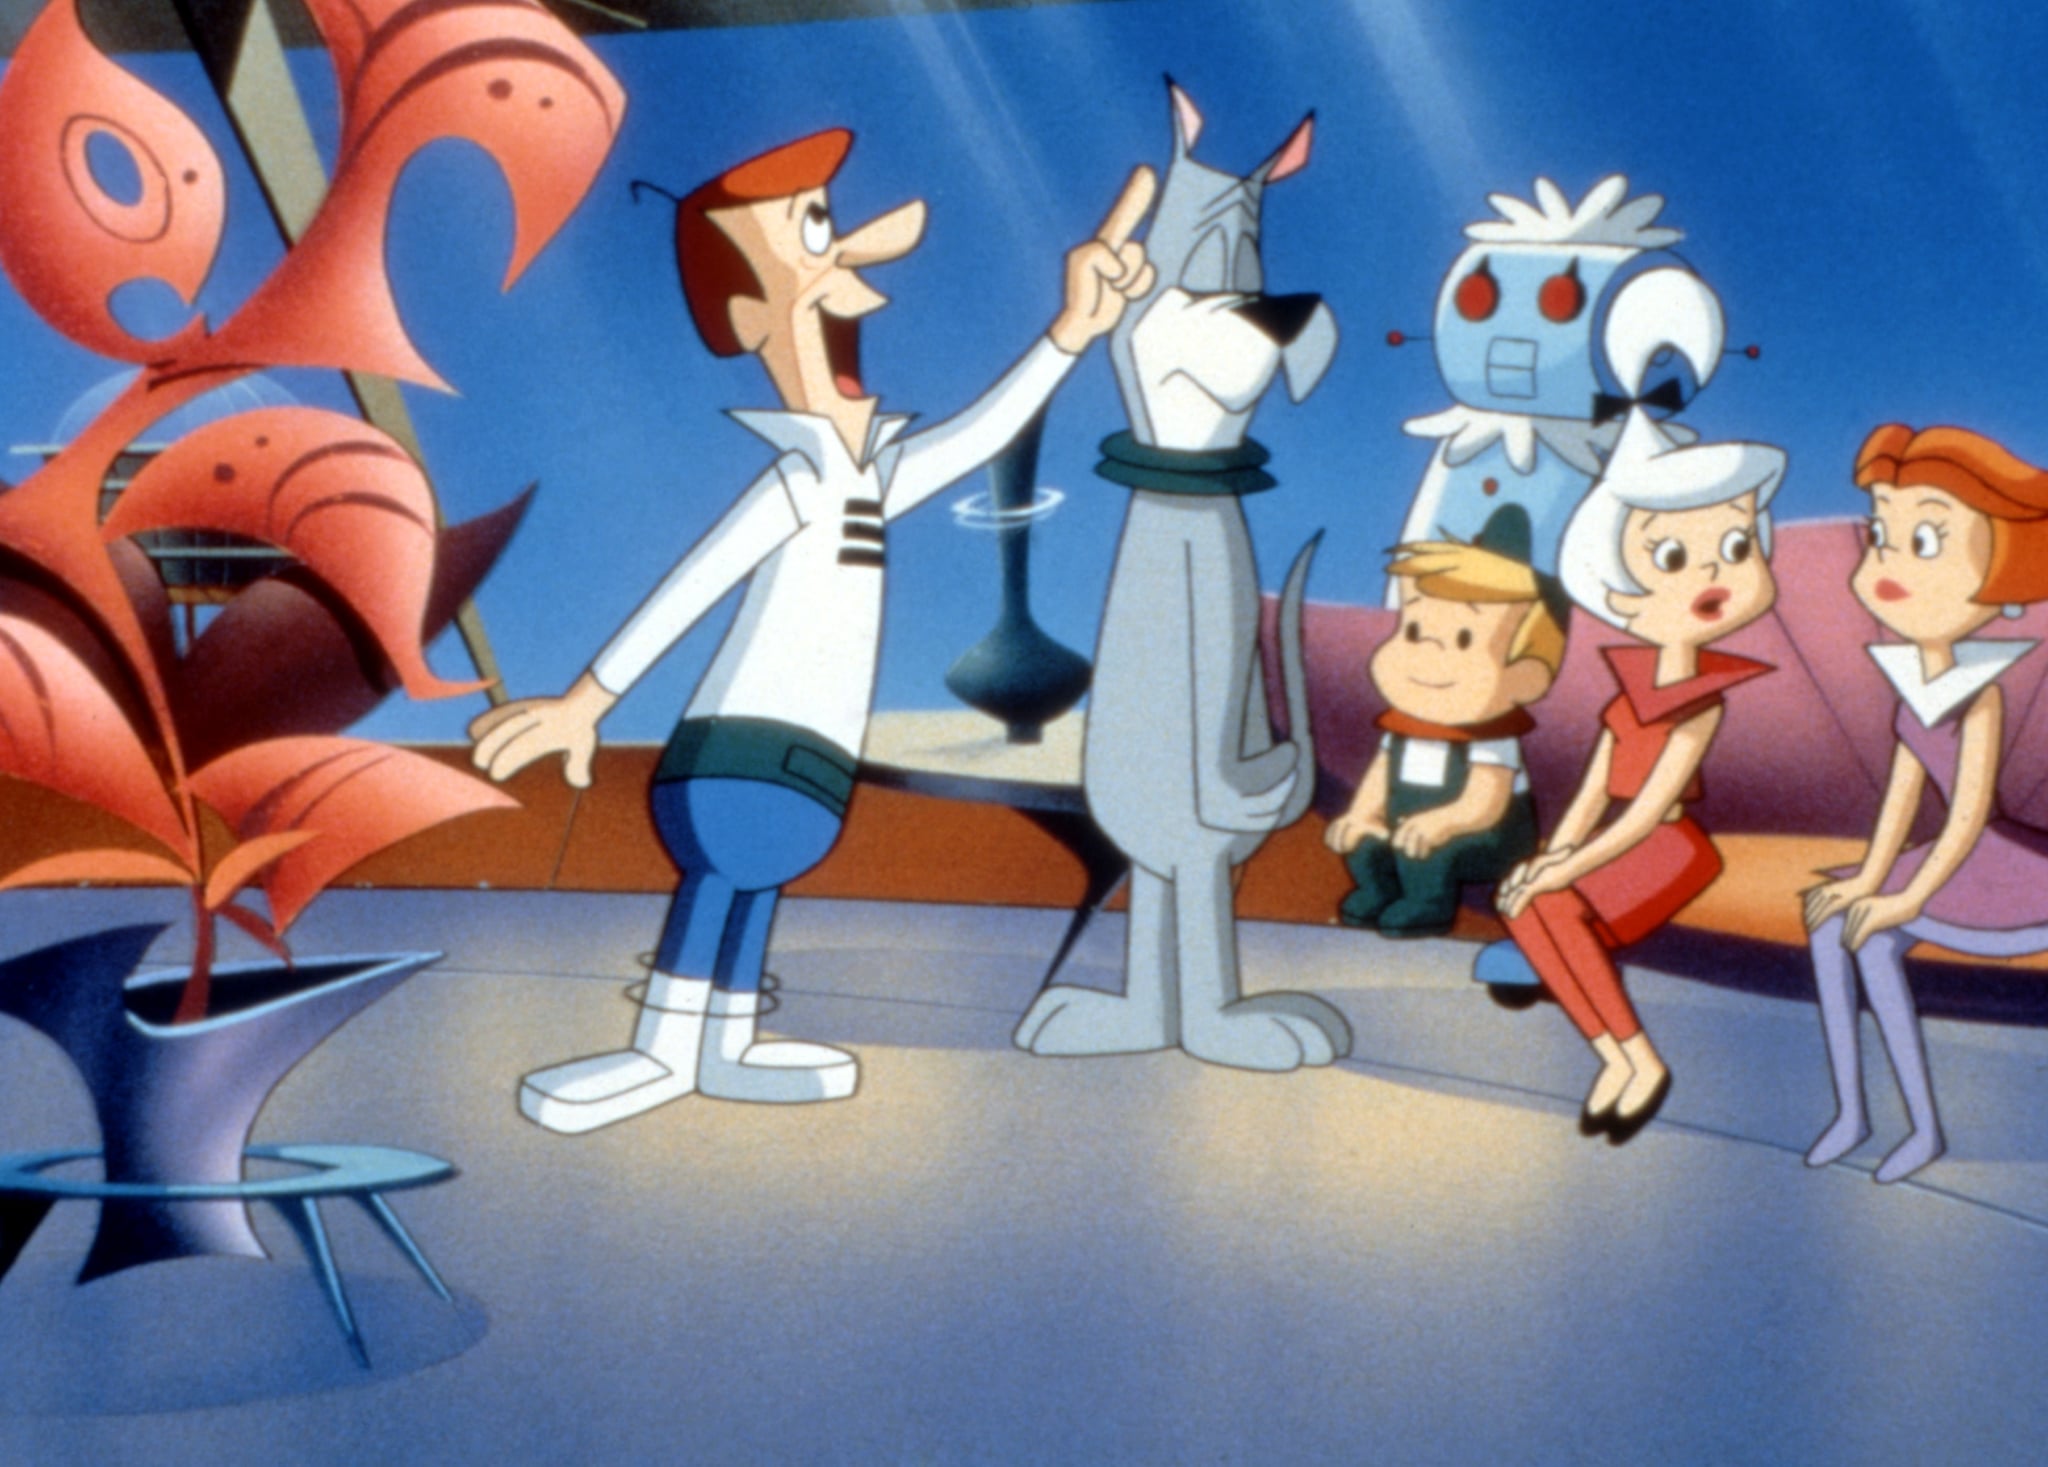 JETSONS: THE MOVIE, George Jetson, Astro, Rosey the Robot, Elroy Jetson, Judy Jetson, Jane Jetson, 1990. Universal/courtesy Everett Collection